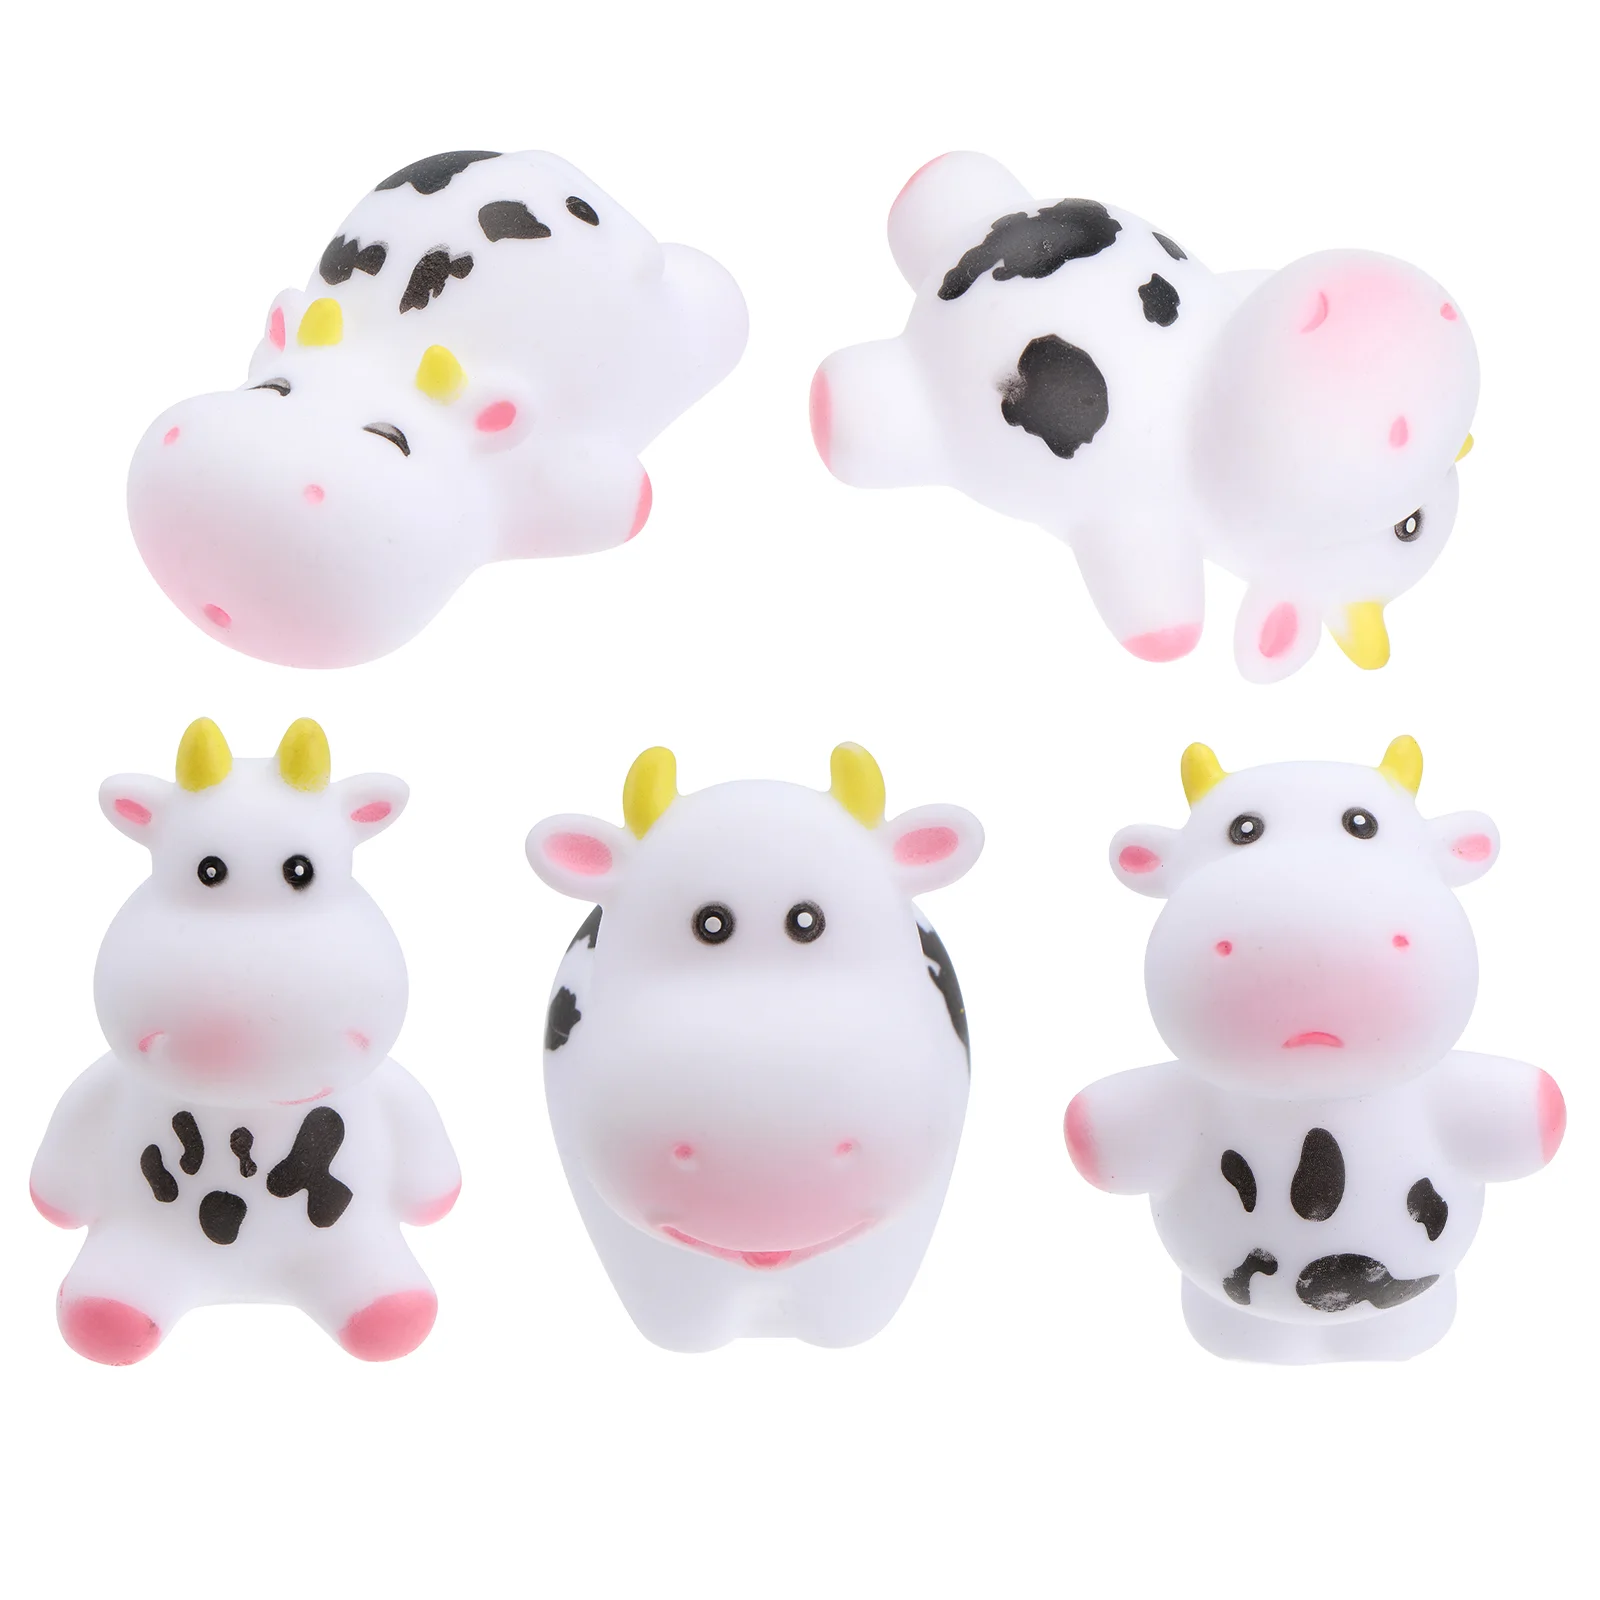 

5 Pcs Cowhide Toy Baby Tub Bathtub Shower Plaything Kids Bathing The Funny Early Learning Pvc Squeaky Child Children